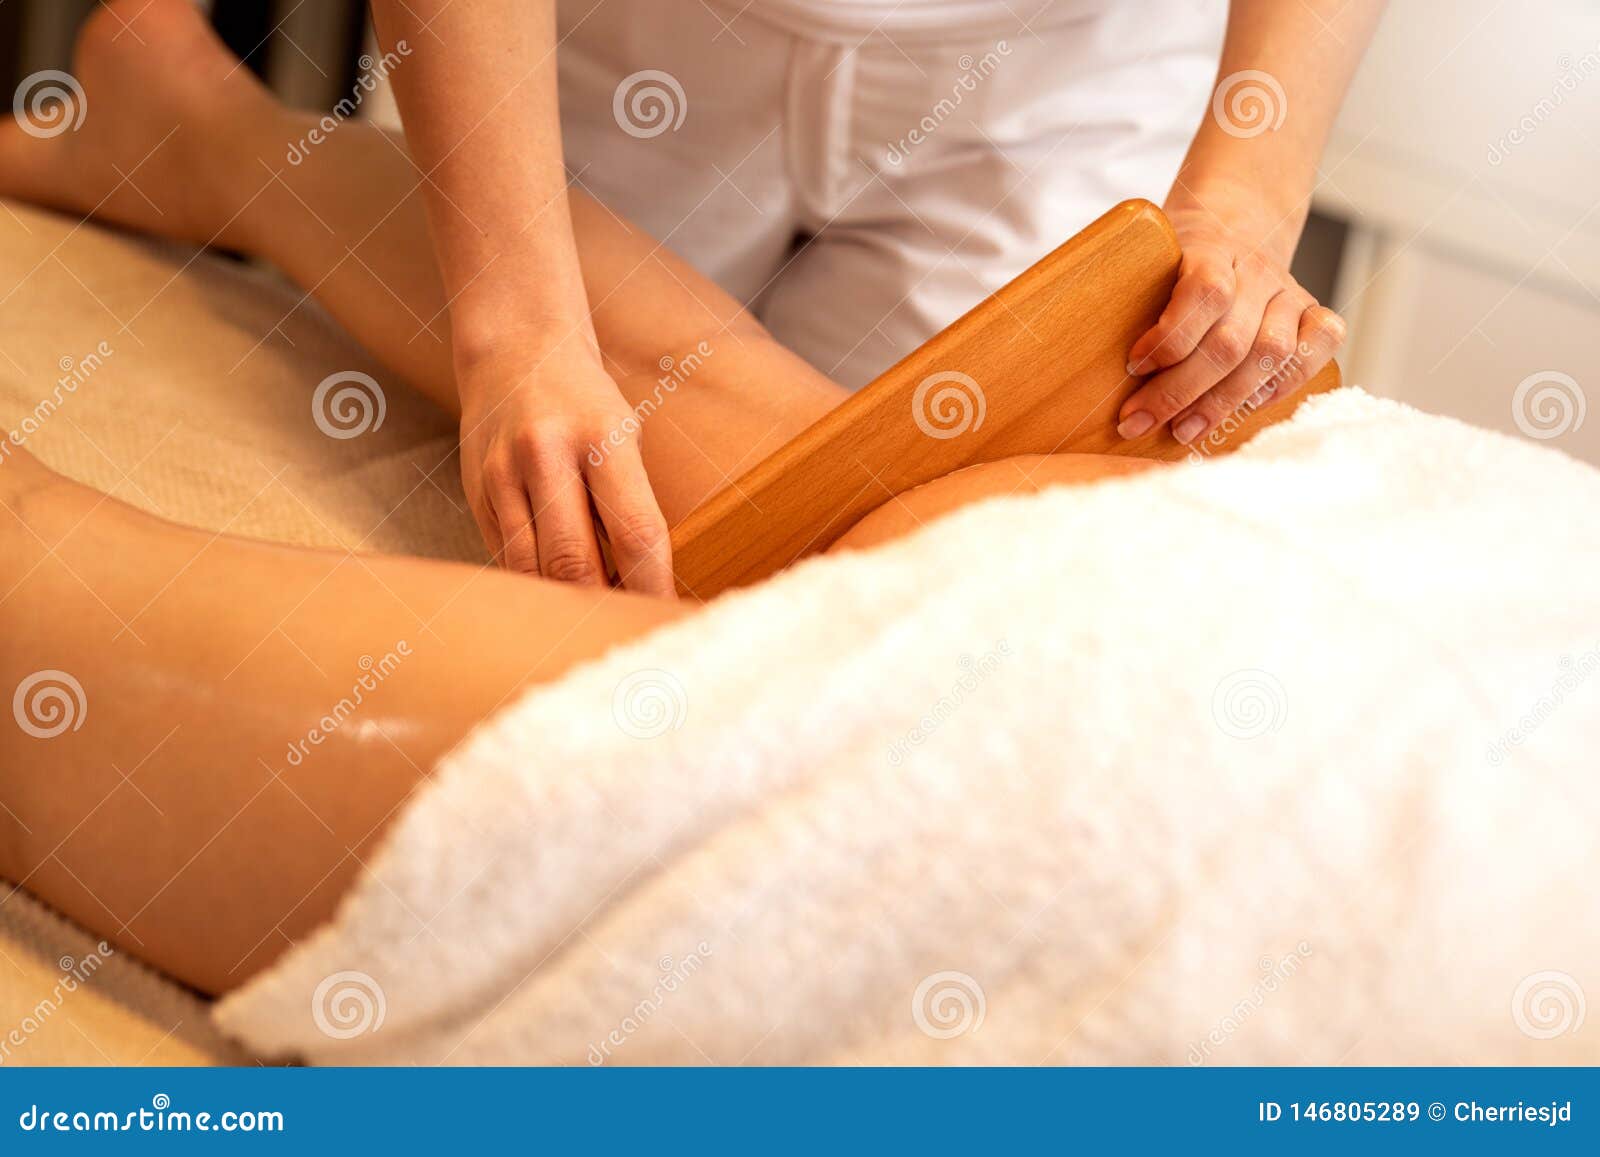 maderotherapy - anti cellulite massage